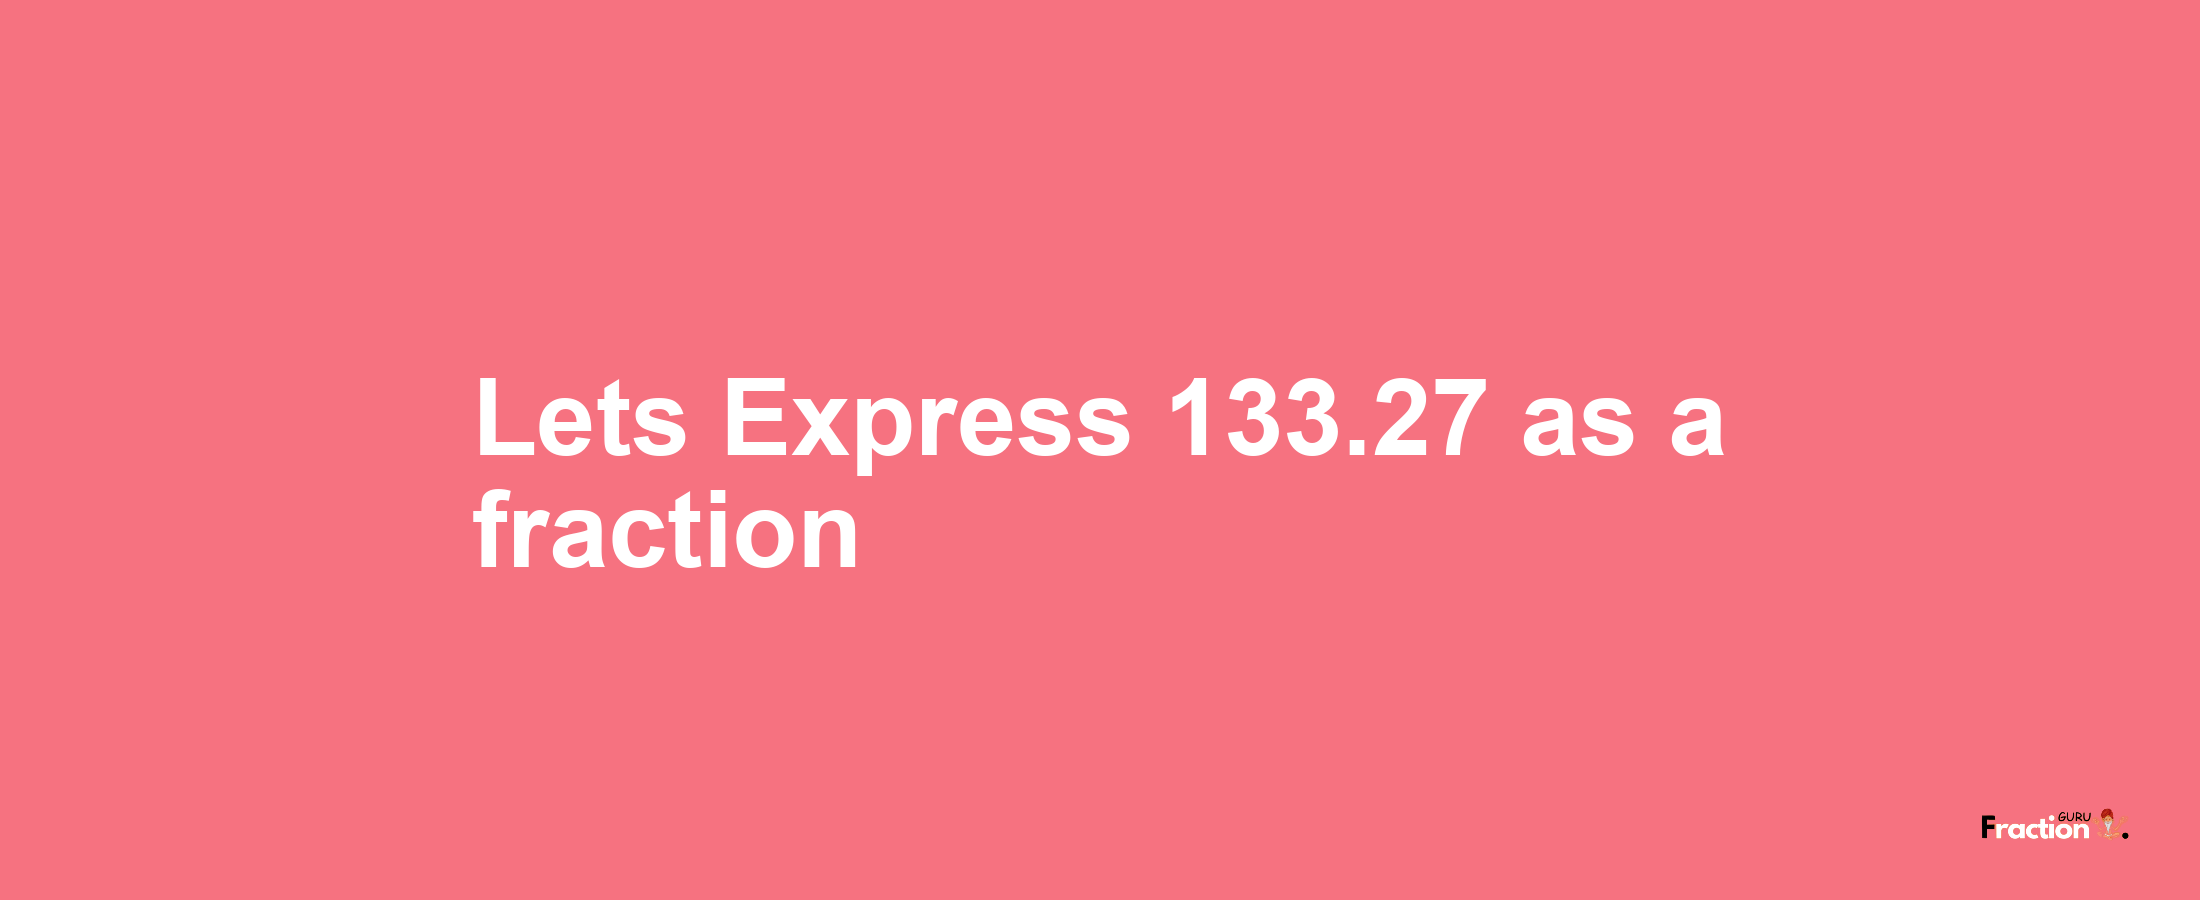 Lets Express 133.27 as afraction